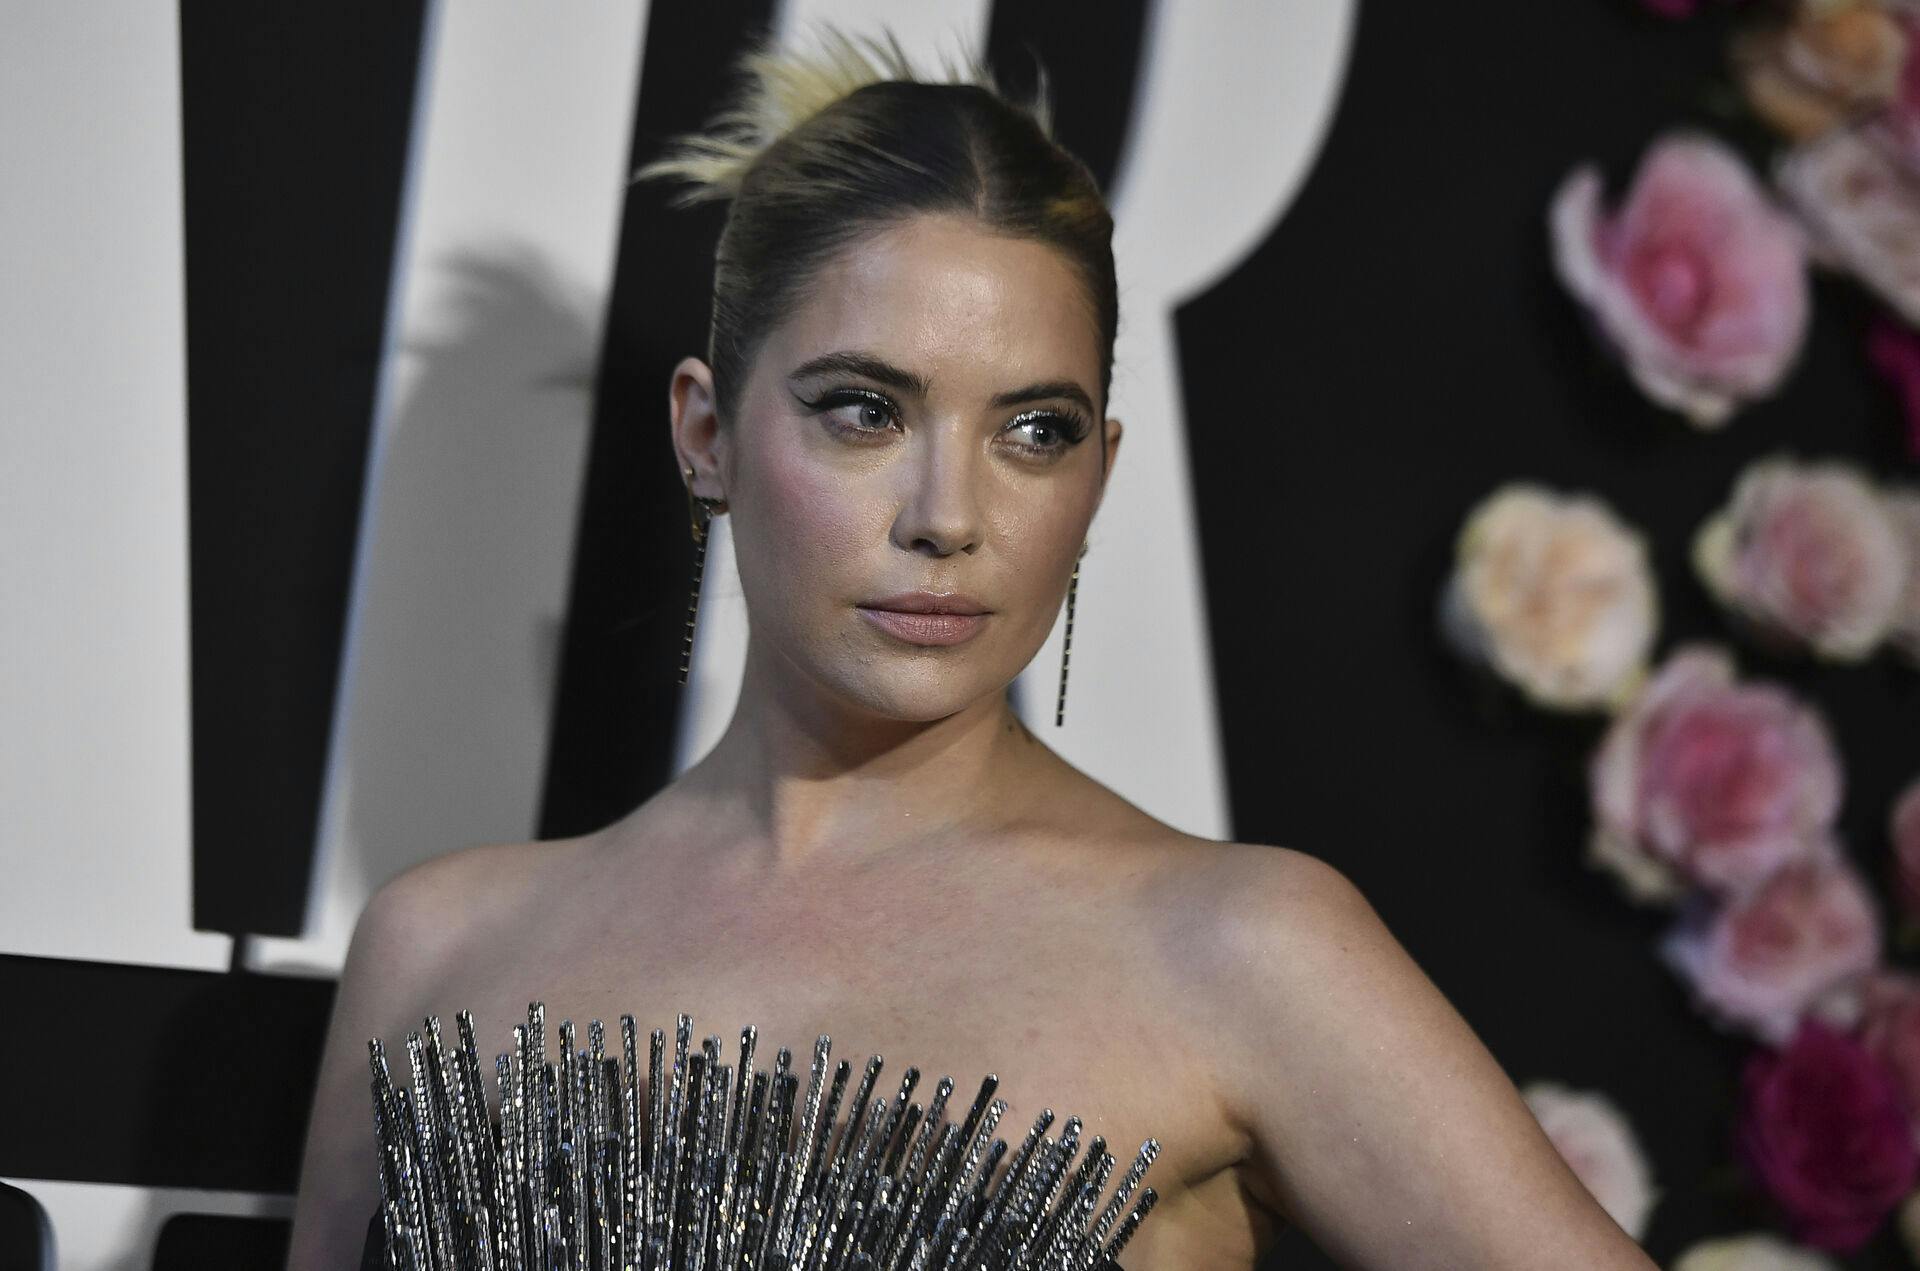 Ashley Benson arrives at the Vanity Fair Future of Hollywood event, Thursday, March 24, 2022, at Mother Wolf in Los Angeles. (Photo by Jordan Strauss/Invision/AP)